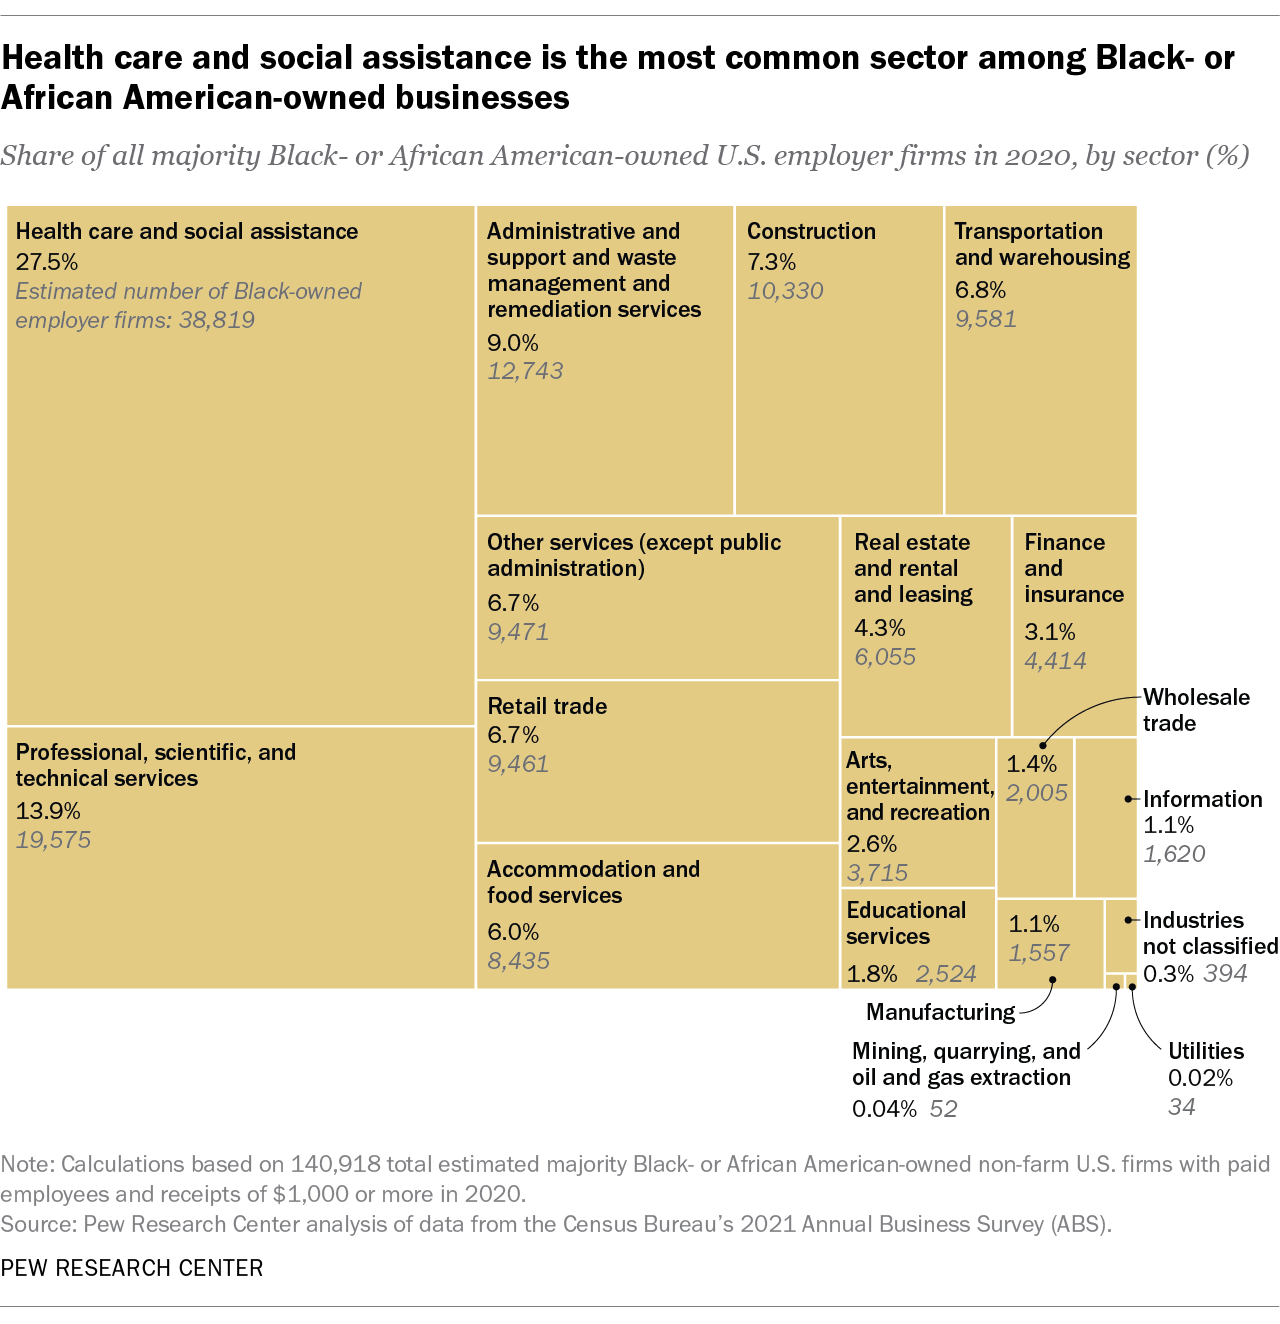 Graph showing that health care and social assistance is the most popular sector of businesses owned by African Americans or blacks